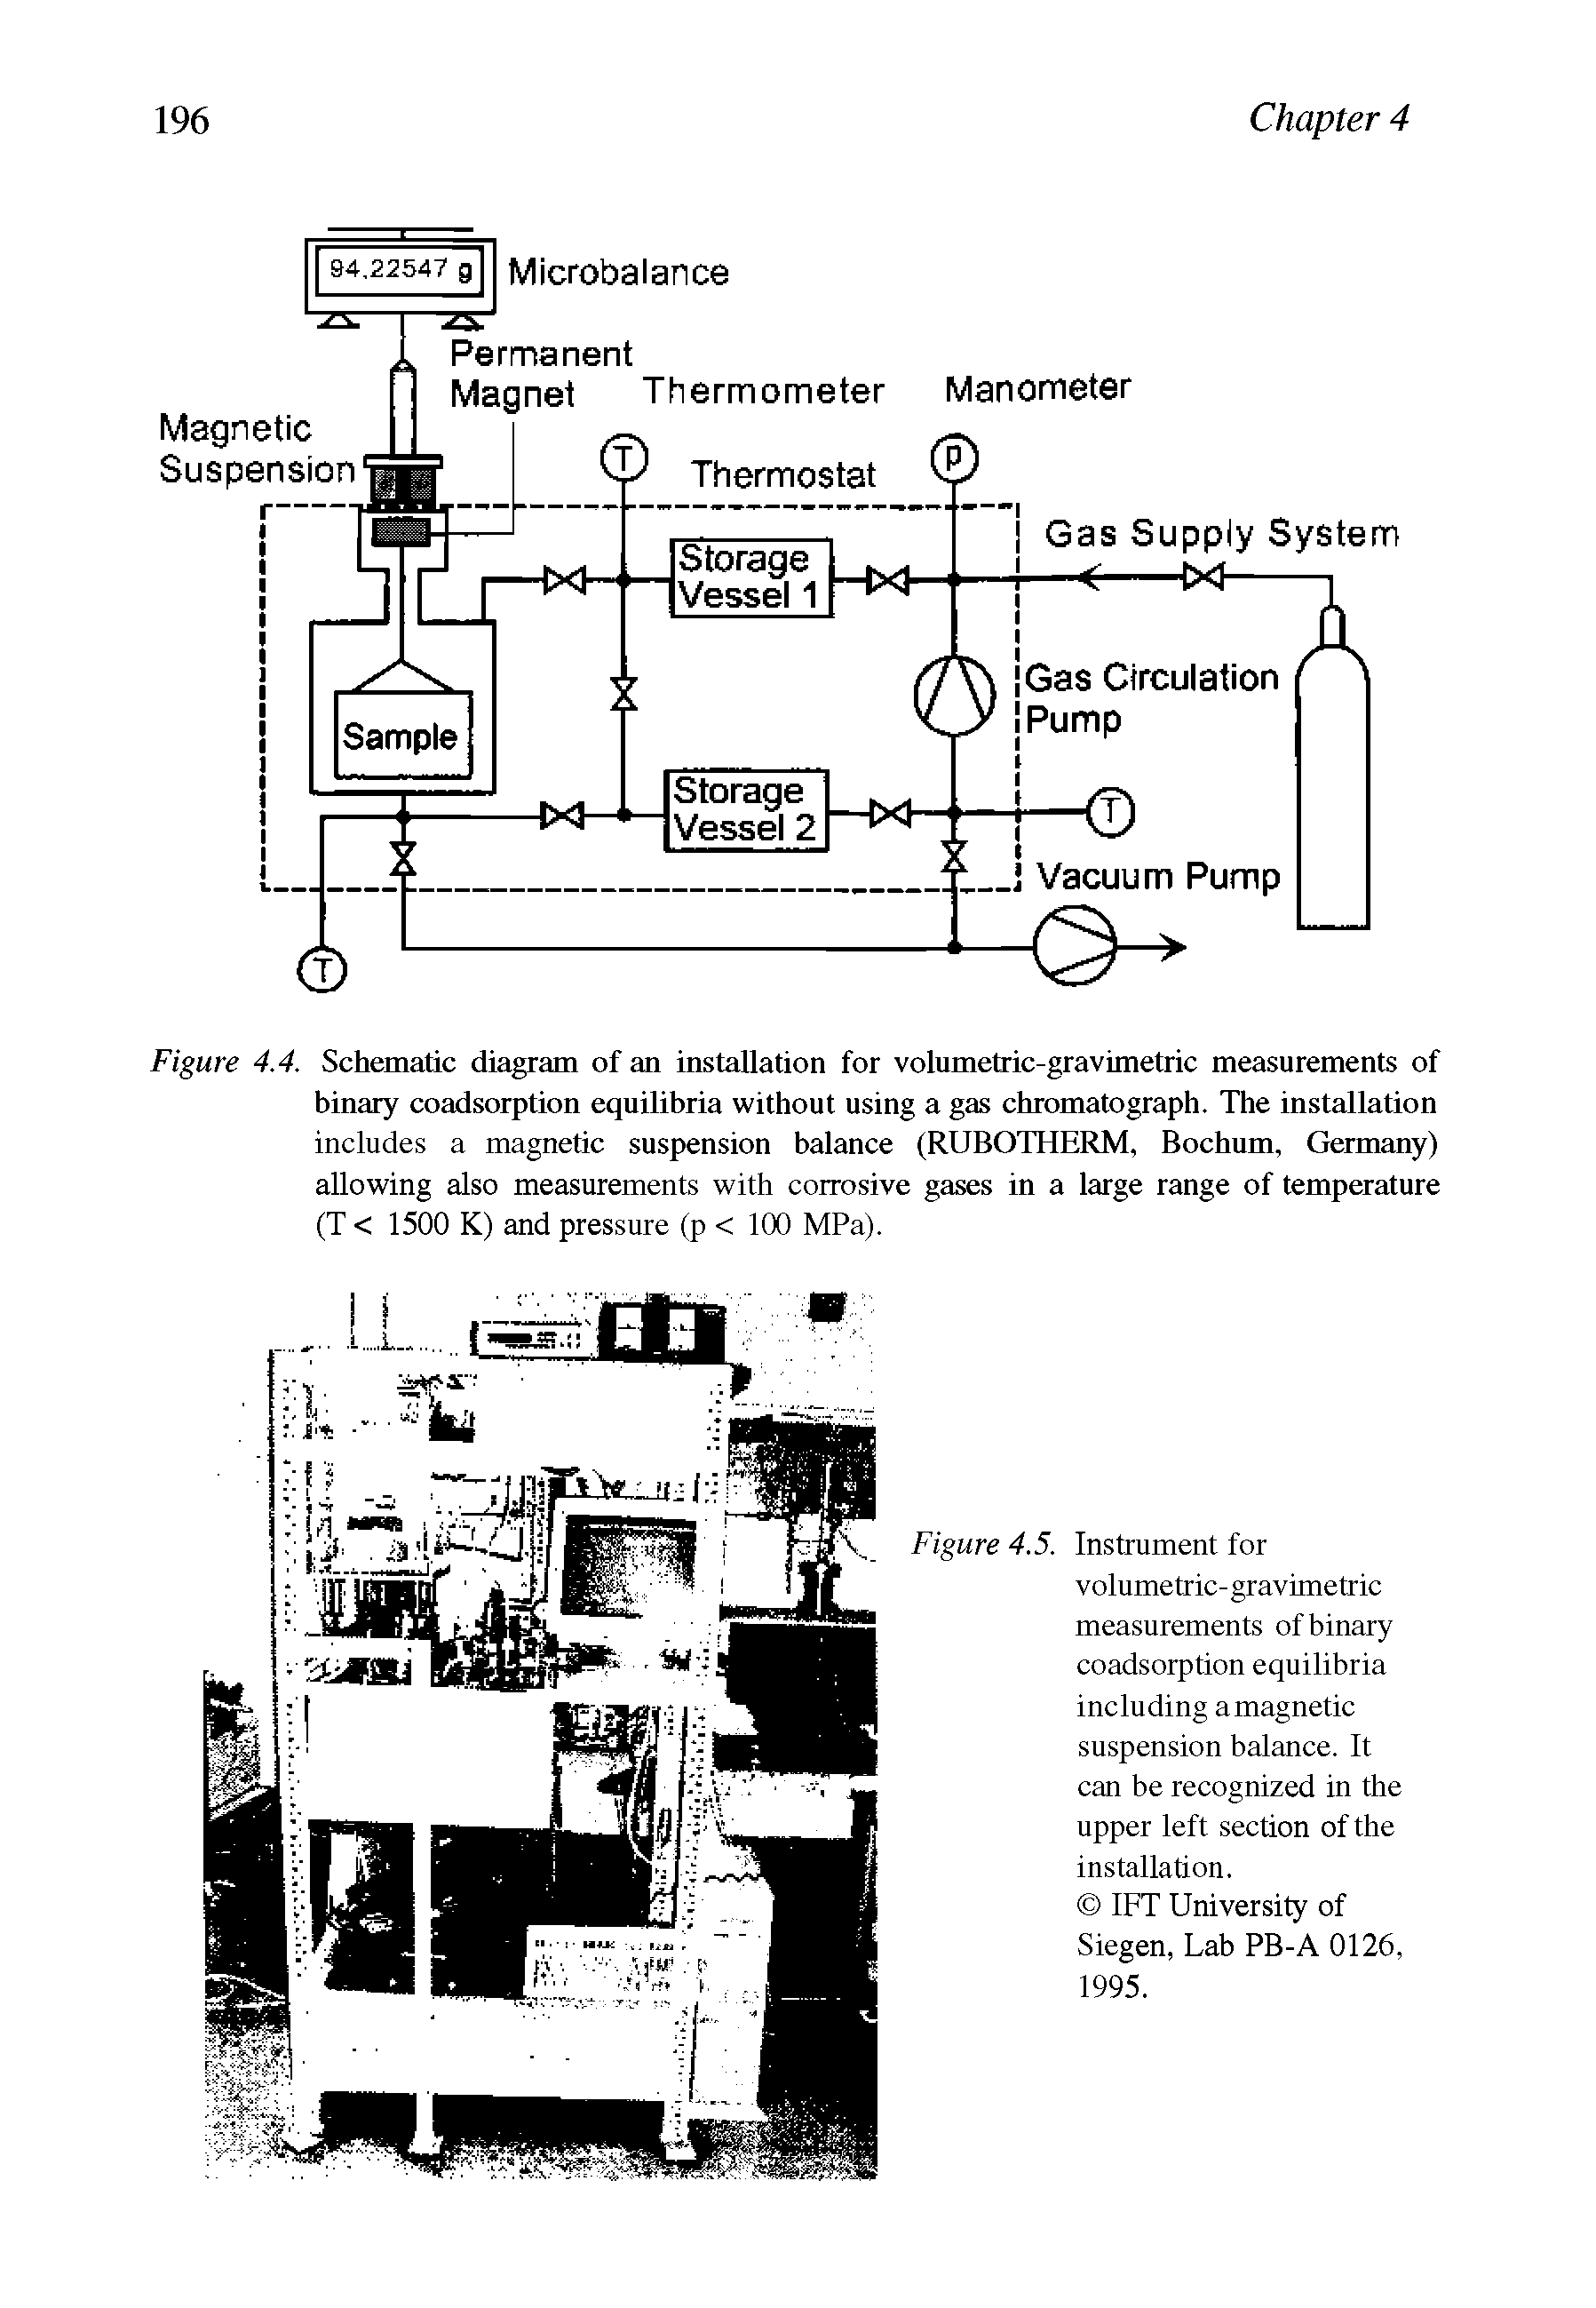 Figure 4.4. Schematic diagram of an installation for volumetric-gravimetric measurements of binary coadsorption equilibria without using a gas chromatograph. The installation includes a magnetic suspension balance (RUBOTHERM, Bochum, Germany) allowing also measurements with corrosive gases in a large range of temperature (T < 1500 K) and pressure (p < 100 MPa).